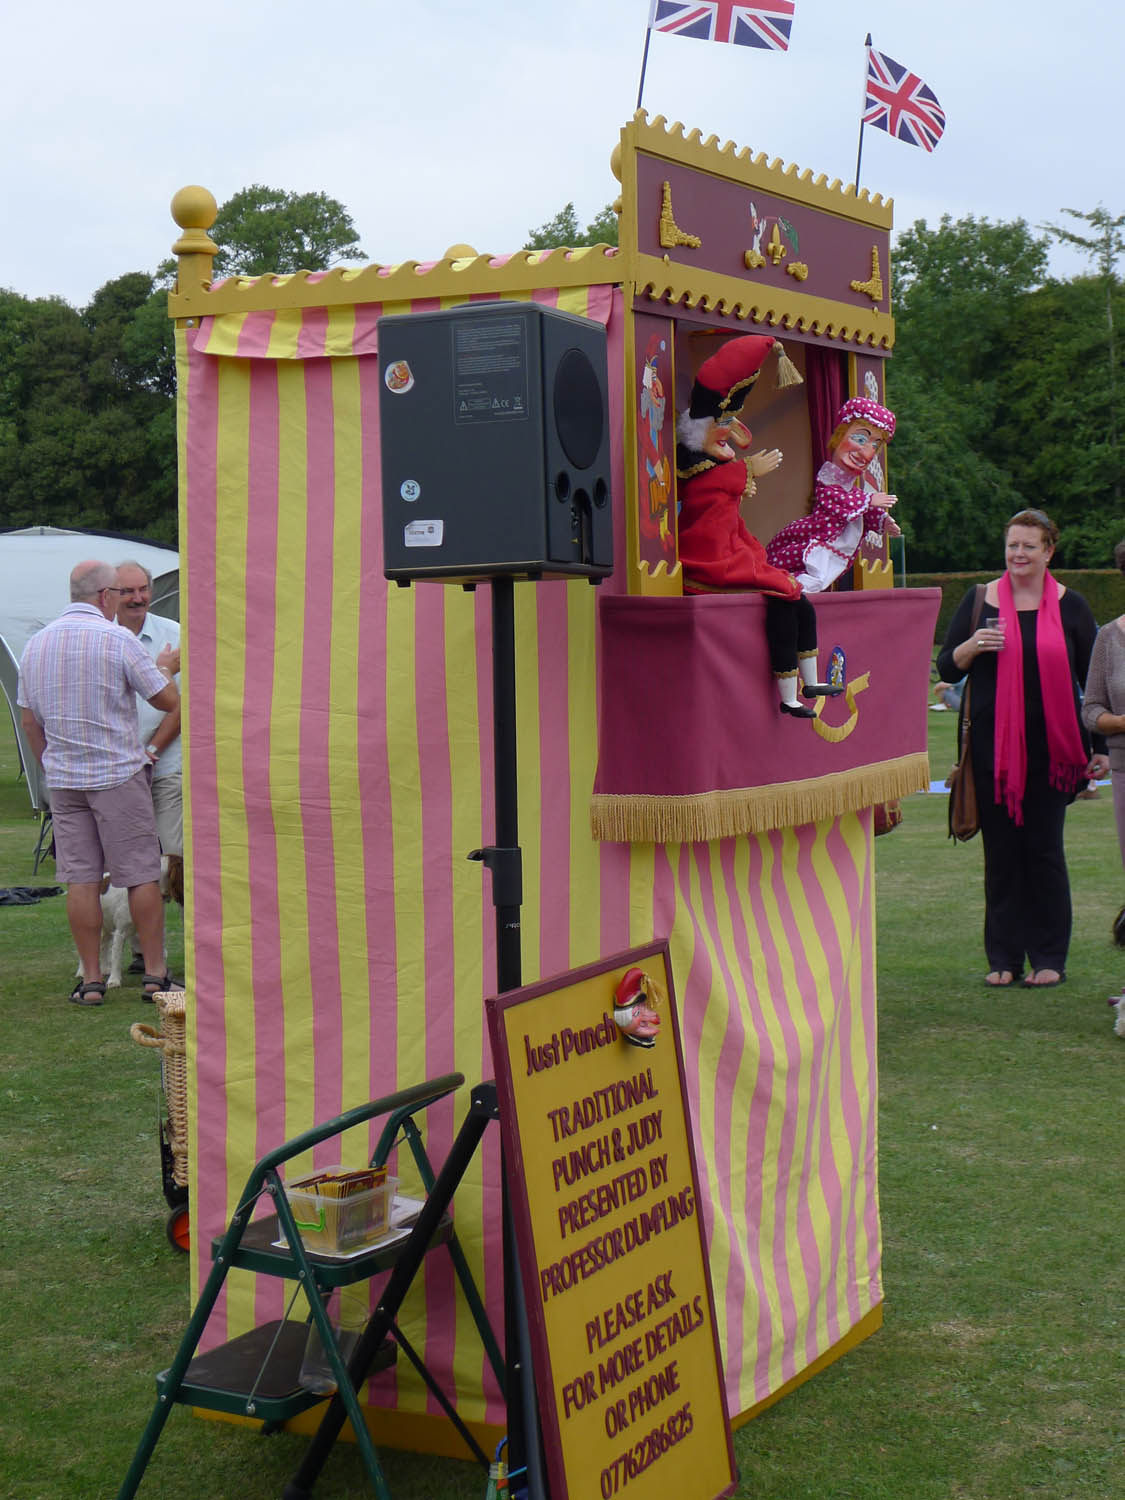 The horror that is Punch & Judy